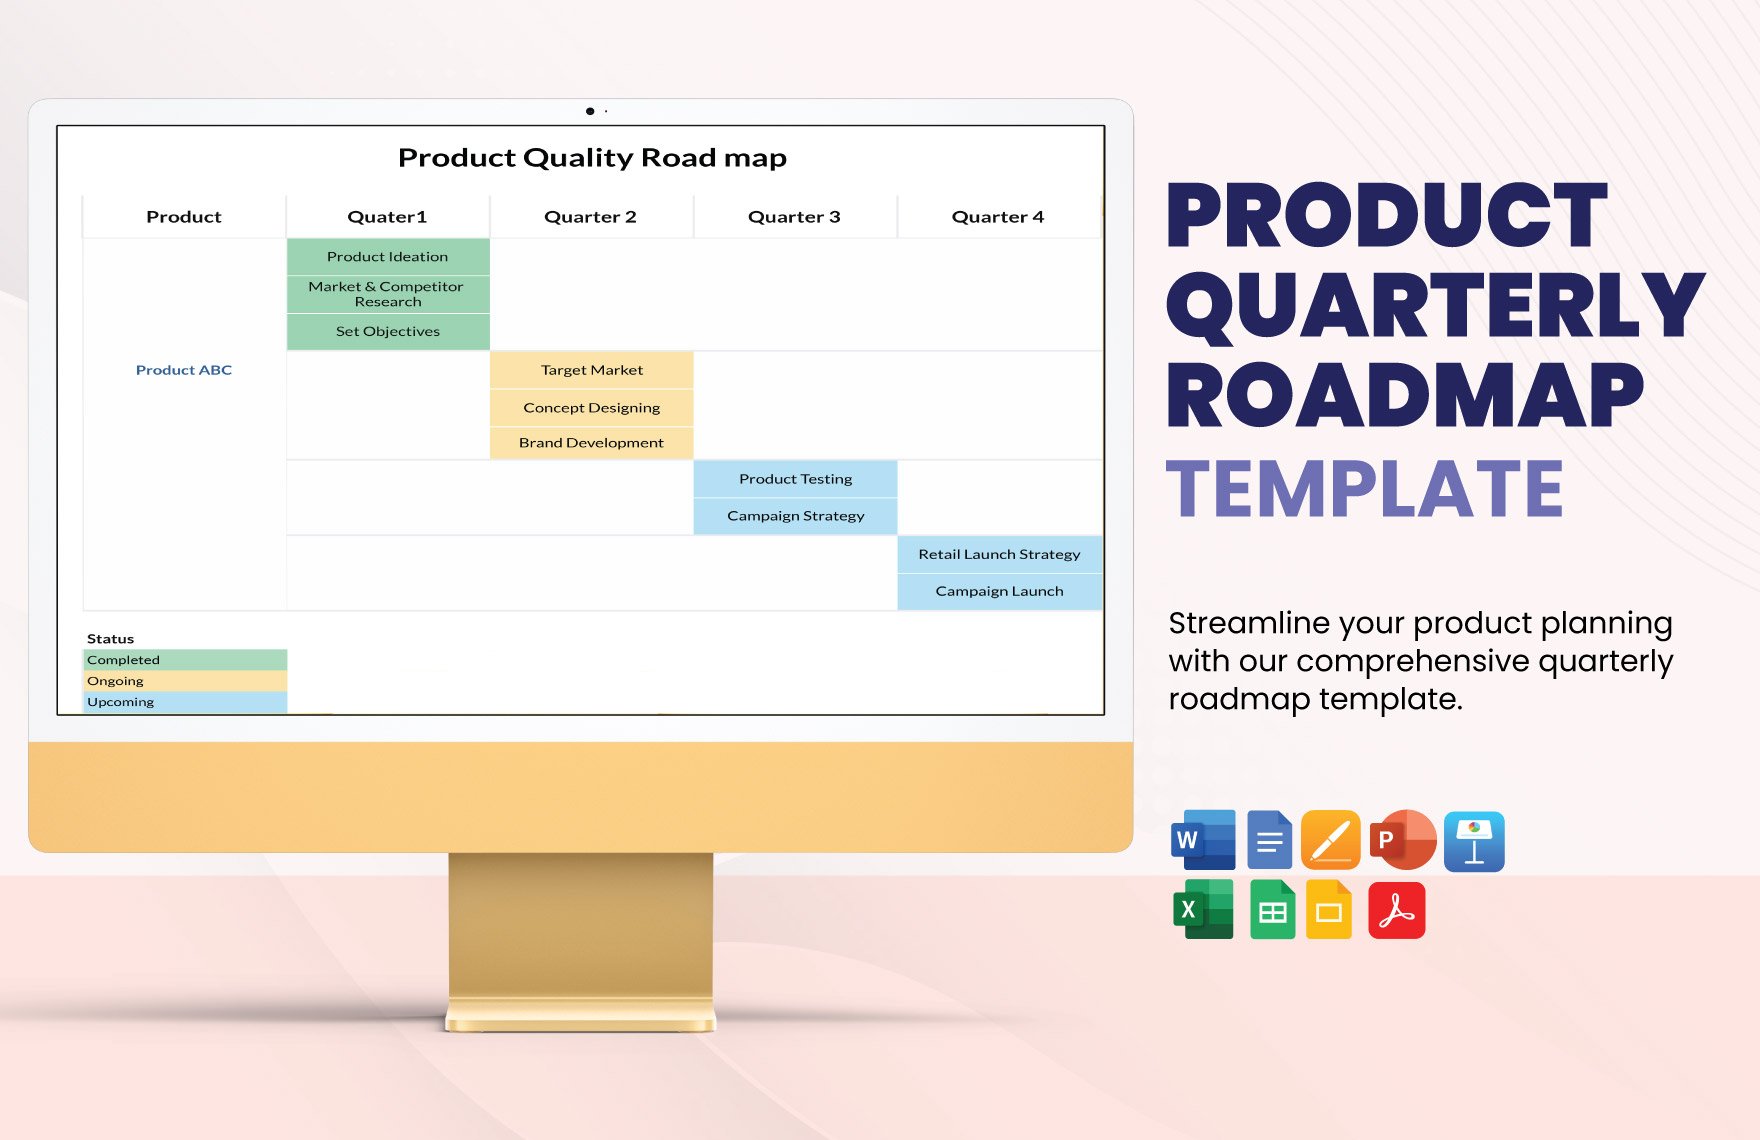 Product Quarterly Roadmap Template